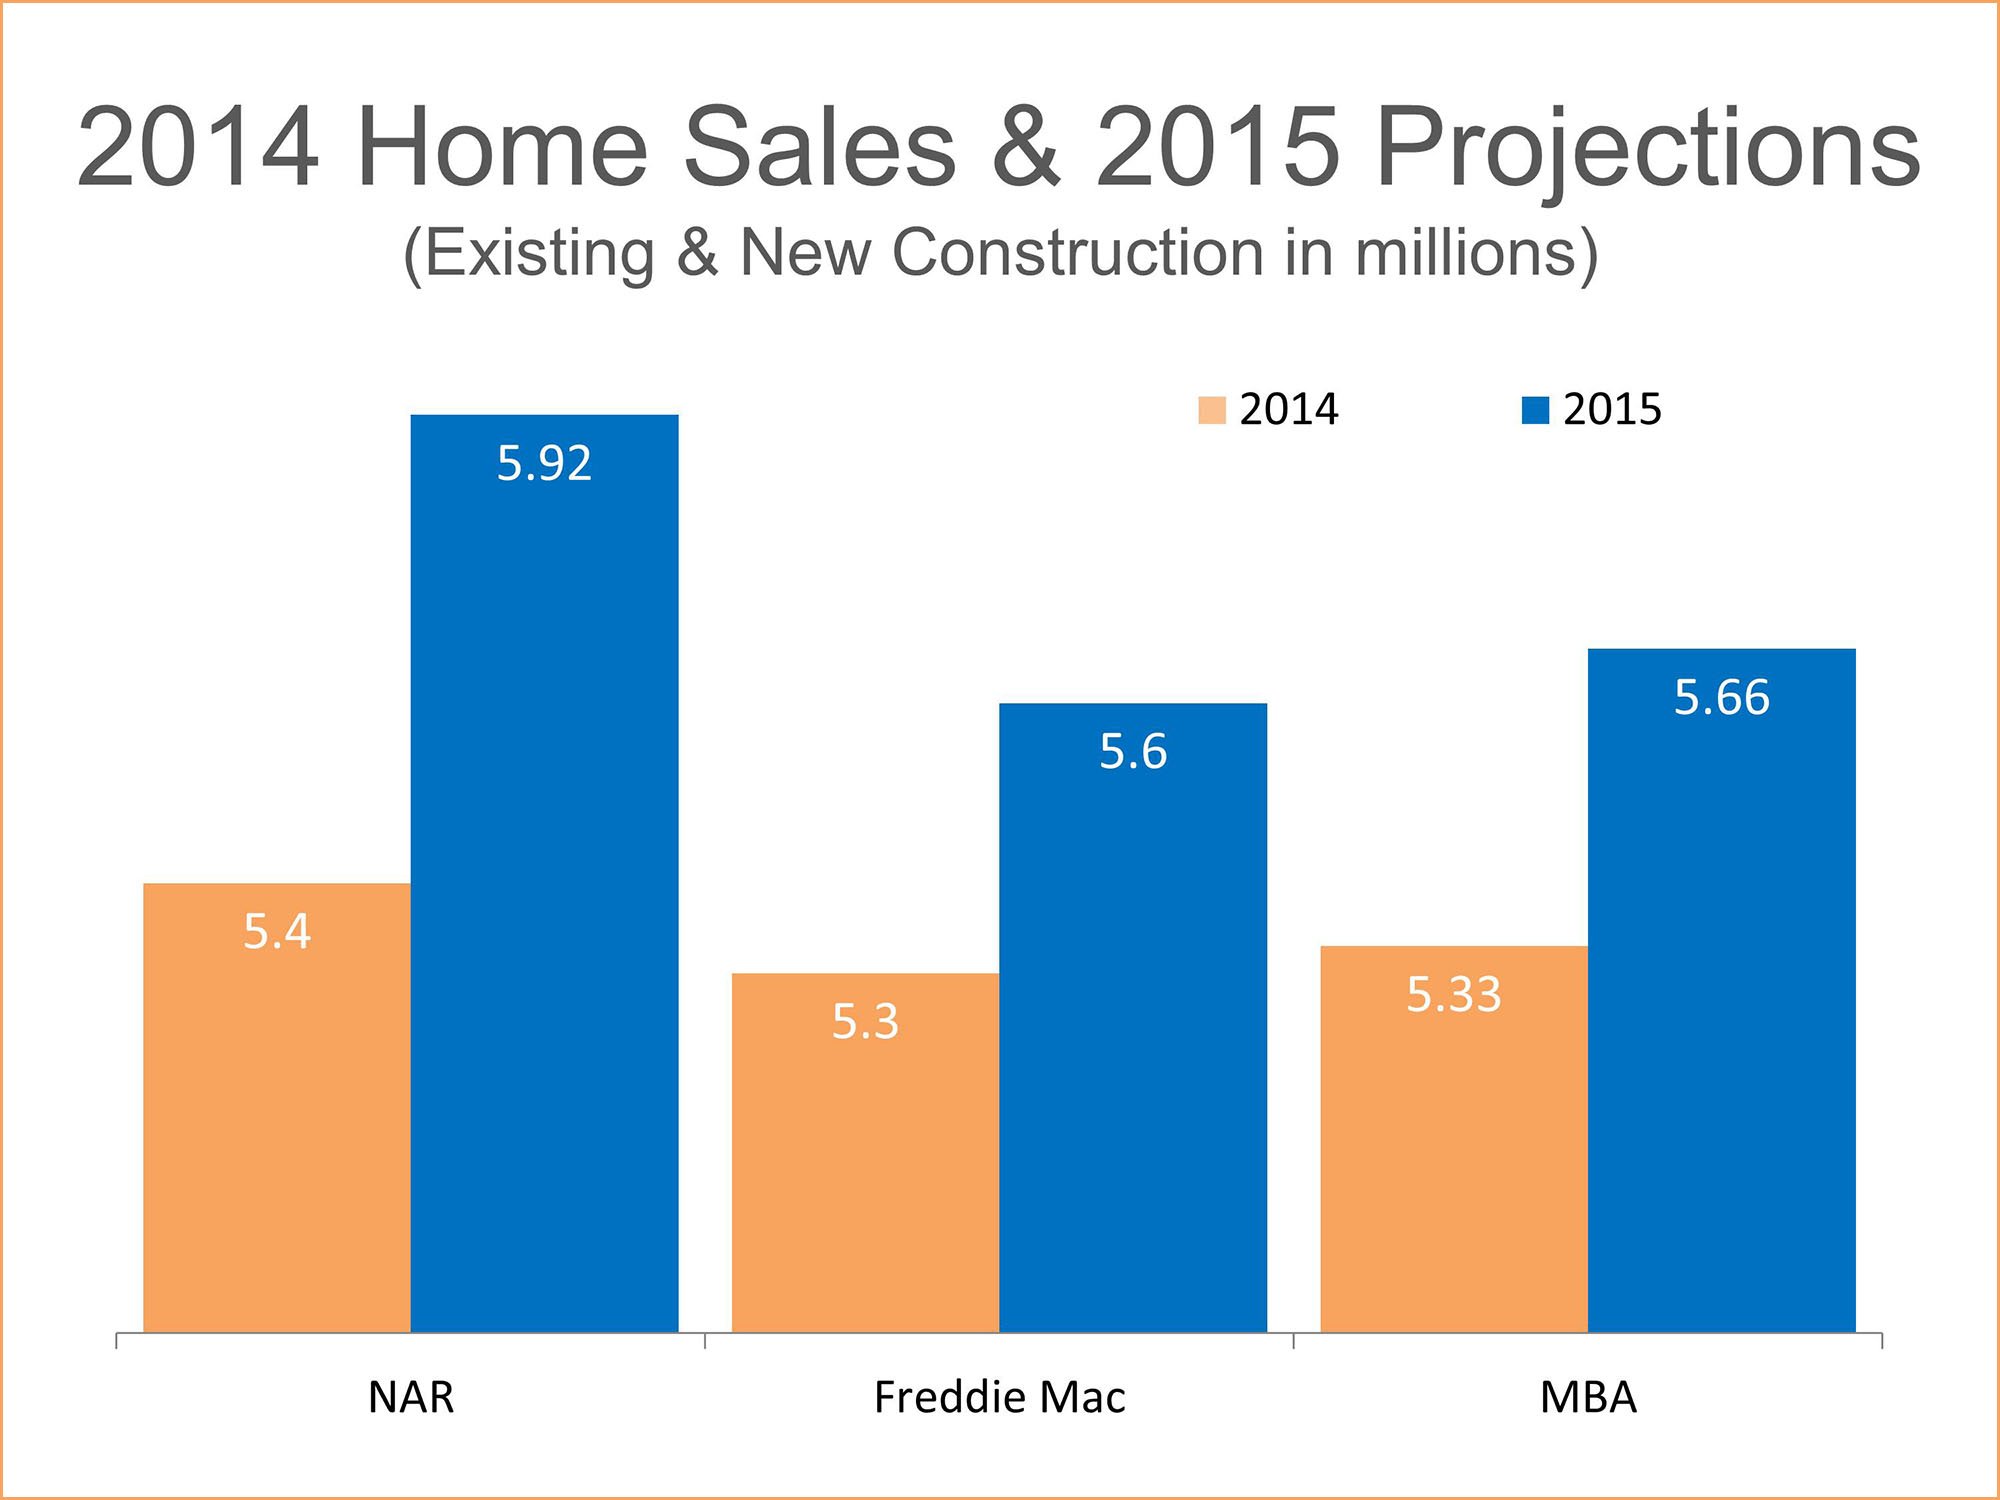 Freddie Mac: 2015 Home Sales to Hit 2007 Levels | Simplifying The Market